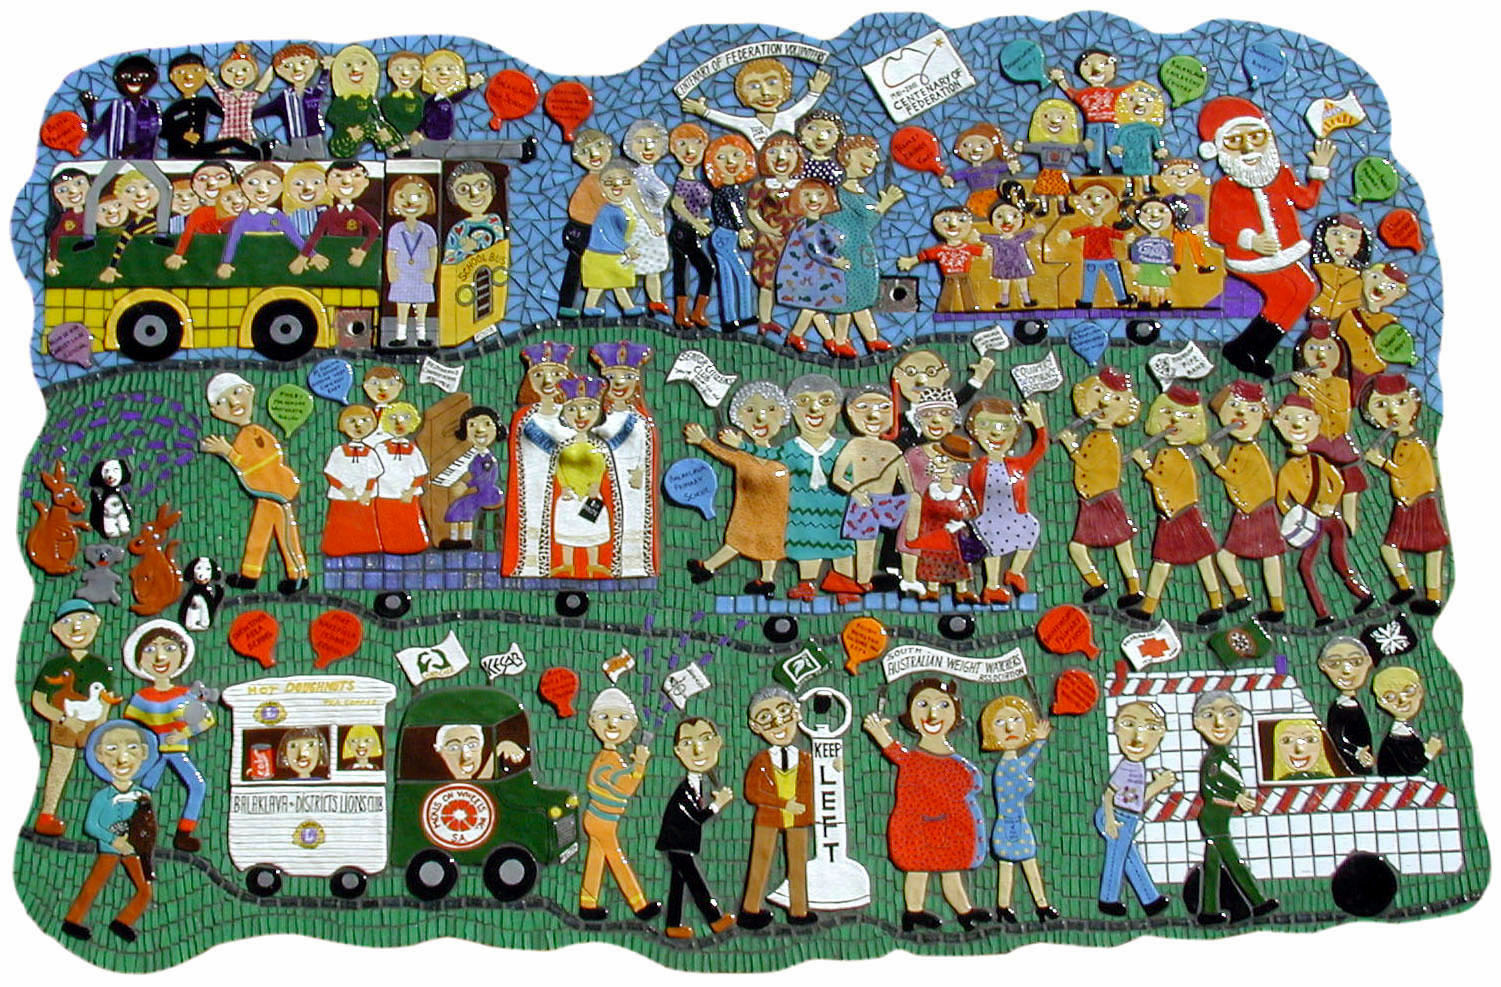 ceramic and mosaic wall based public sculpture part of the centenary of federation gateway in South Australia,depicting volunteers of all descriptions from St Johns to Red Cross, Apex and the Lions 